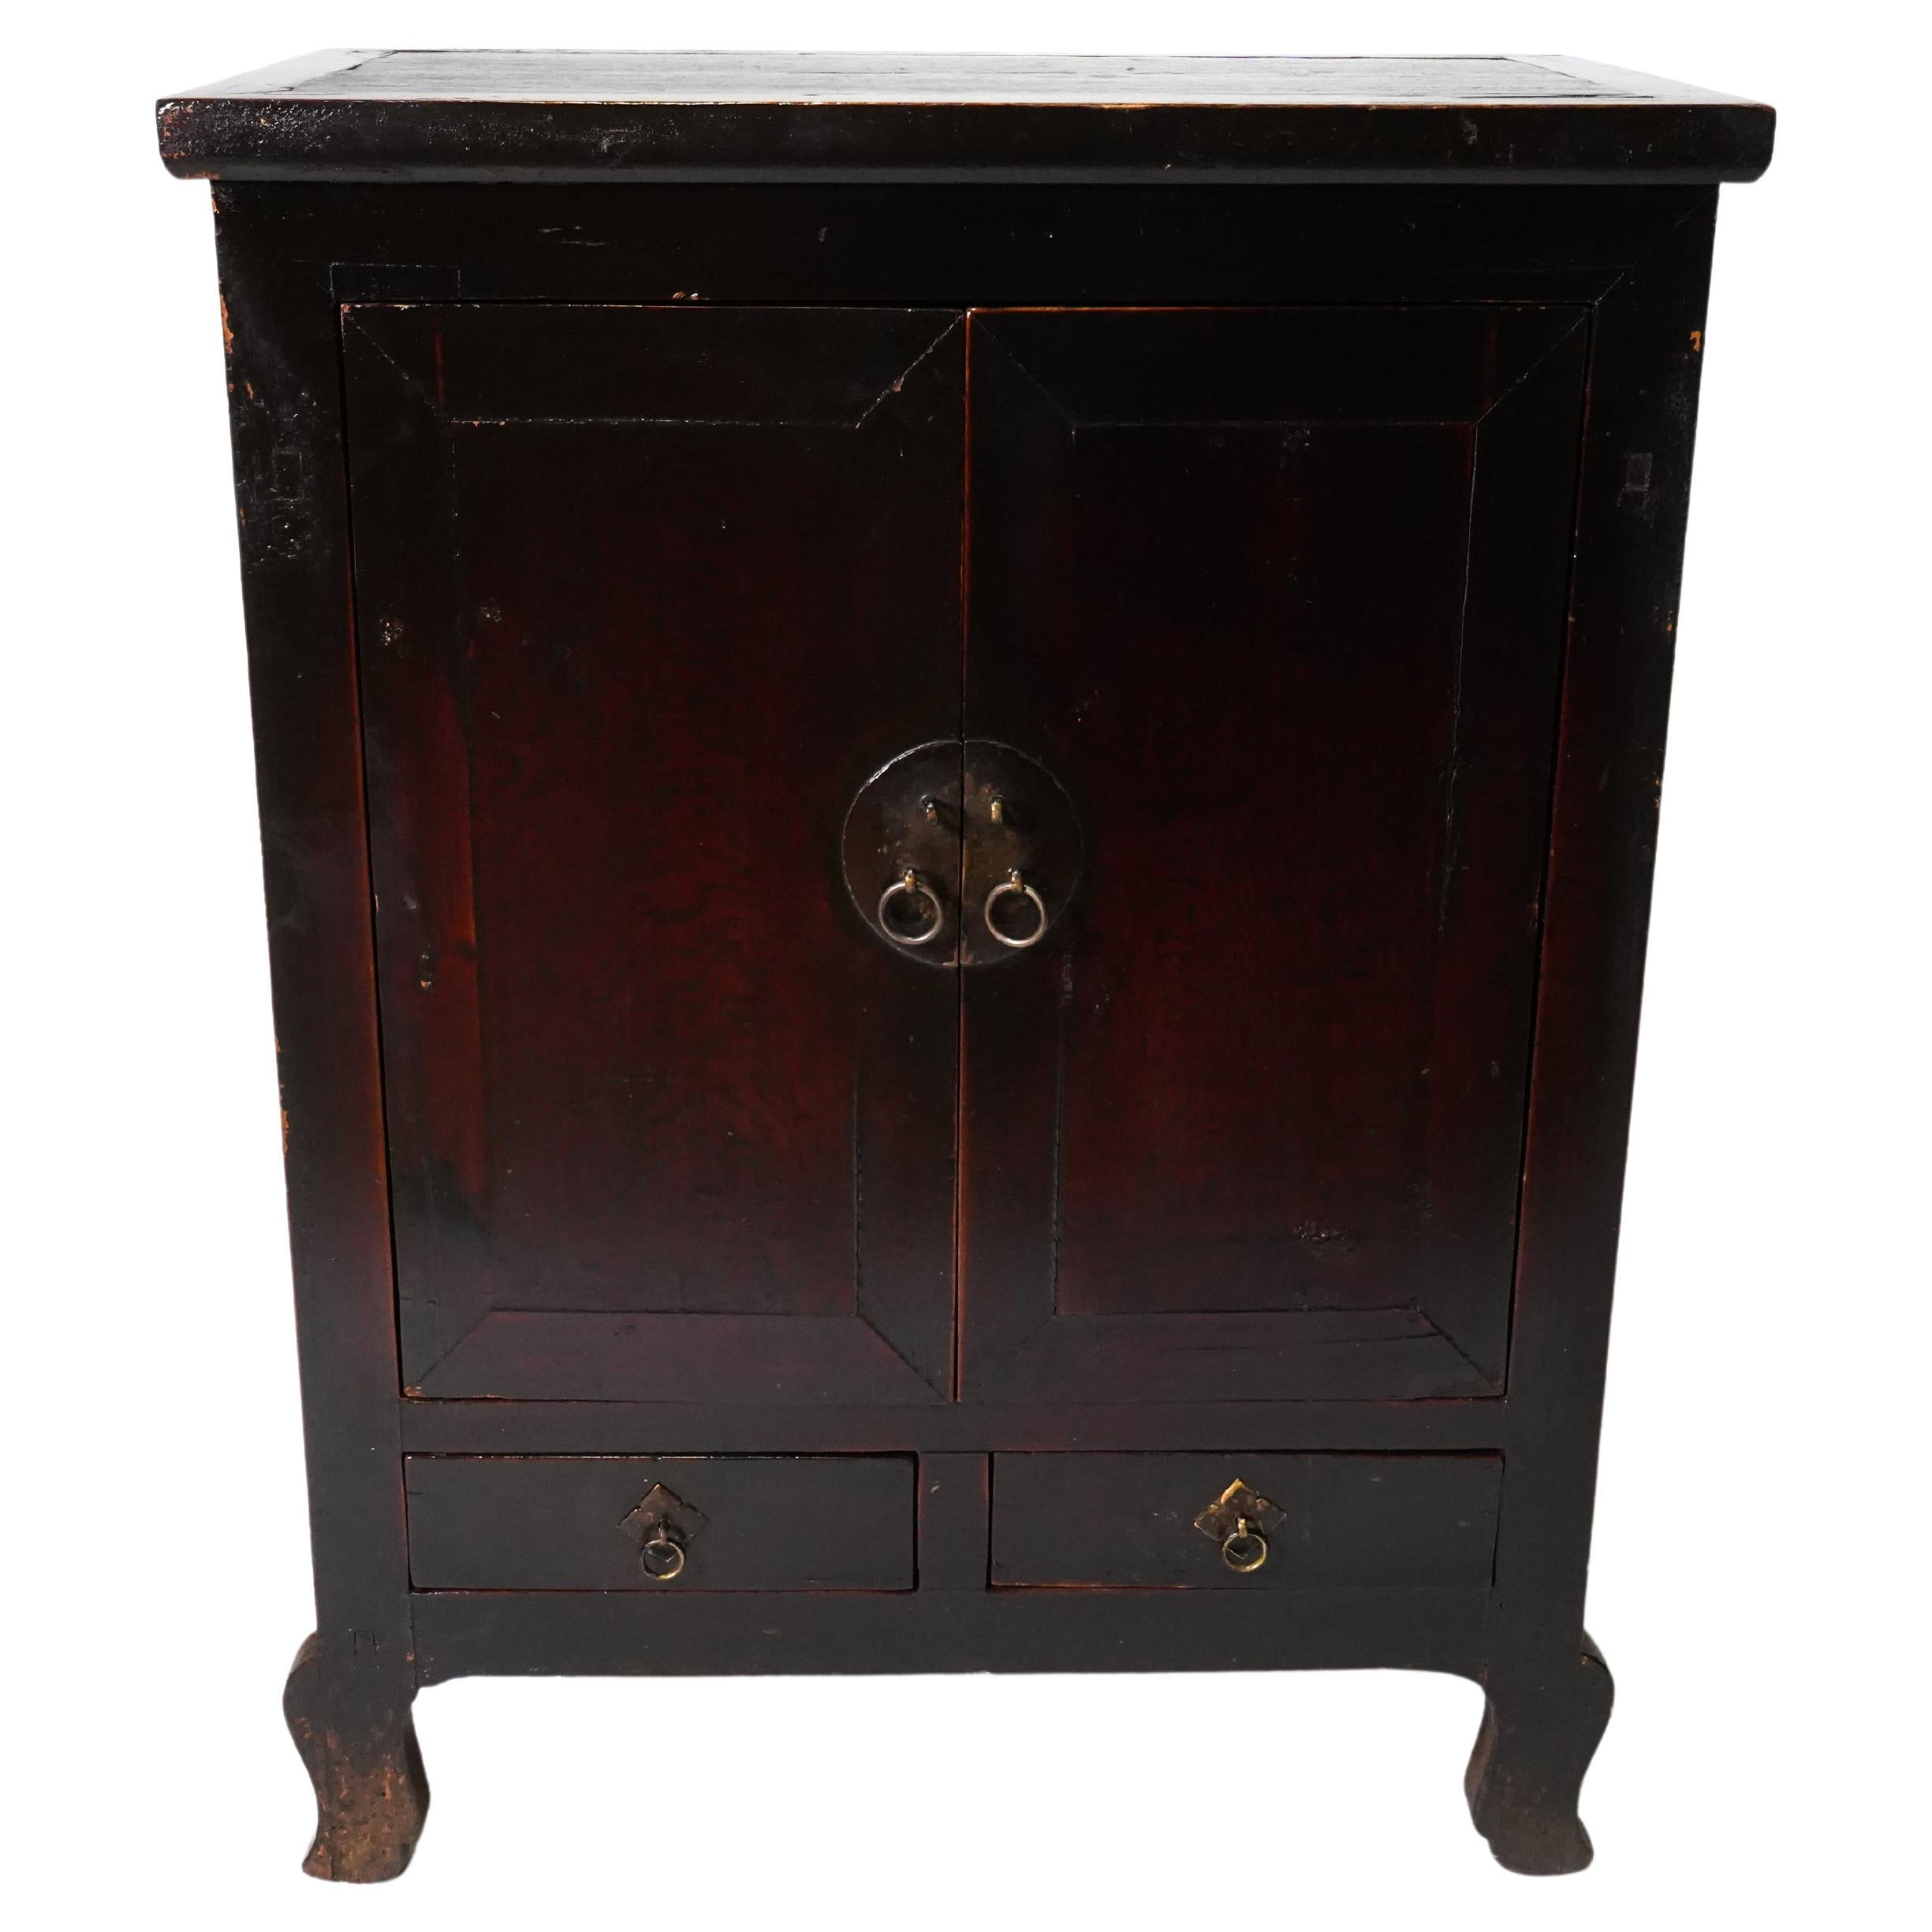 Early 20th C Chinese Cabinet with Original Lacquer and Cabriole Legs